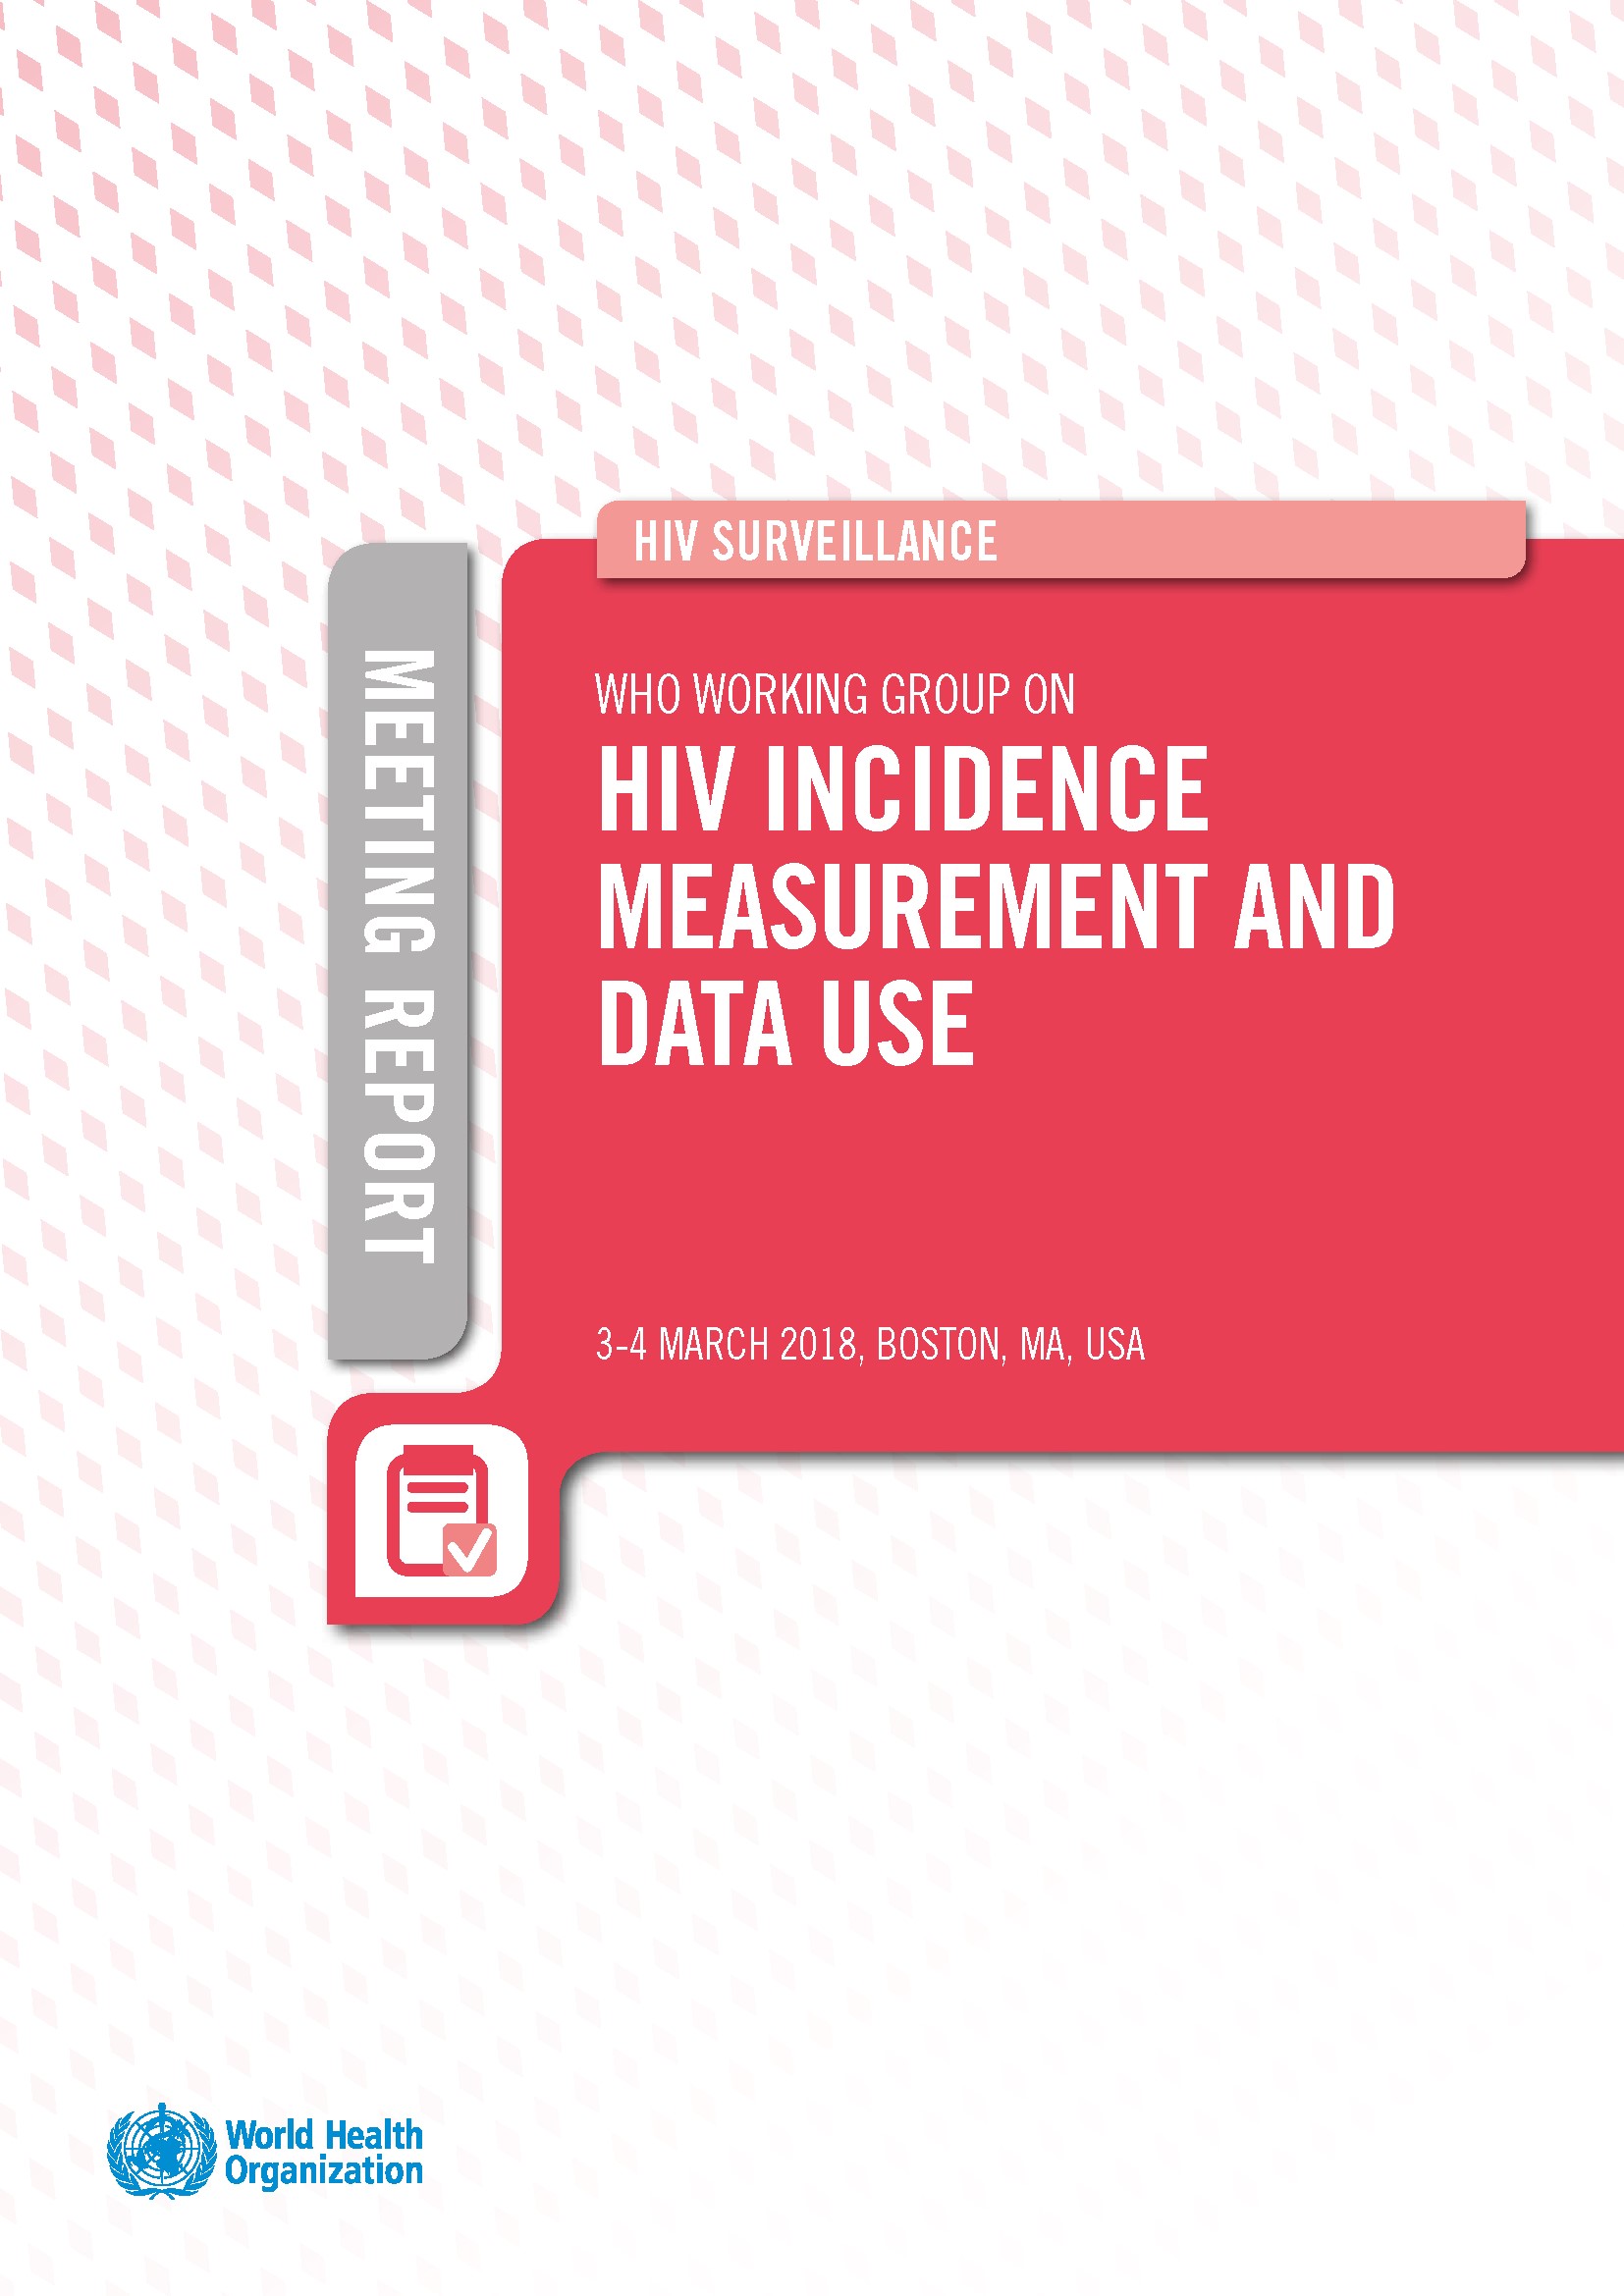 Rapporteur Services for the World Health Organization Working Group on HIV Incidence Measurement and Data Use